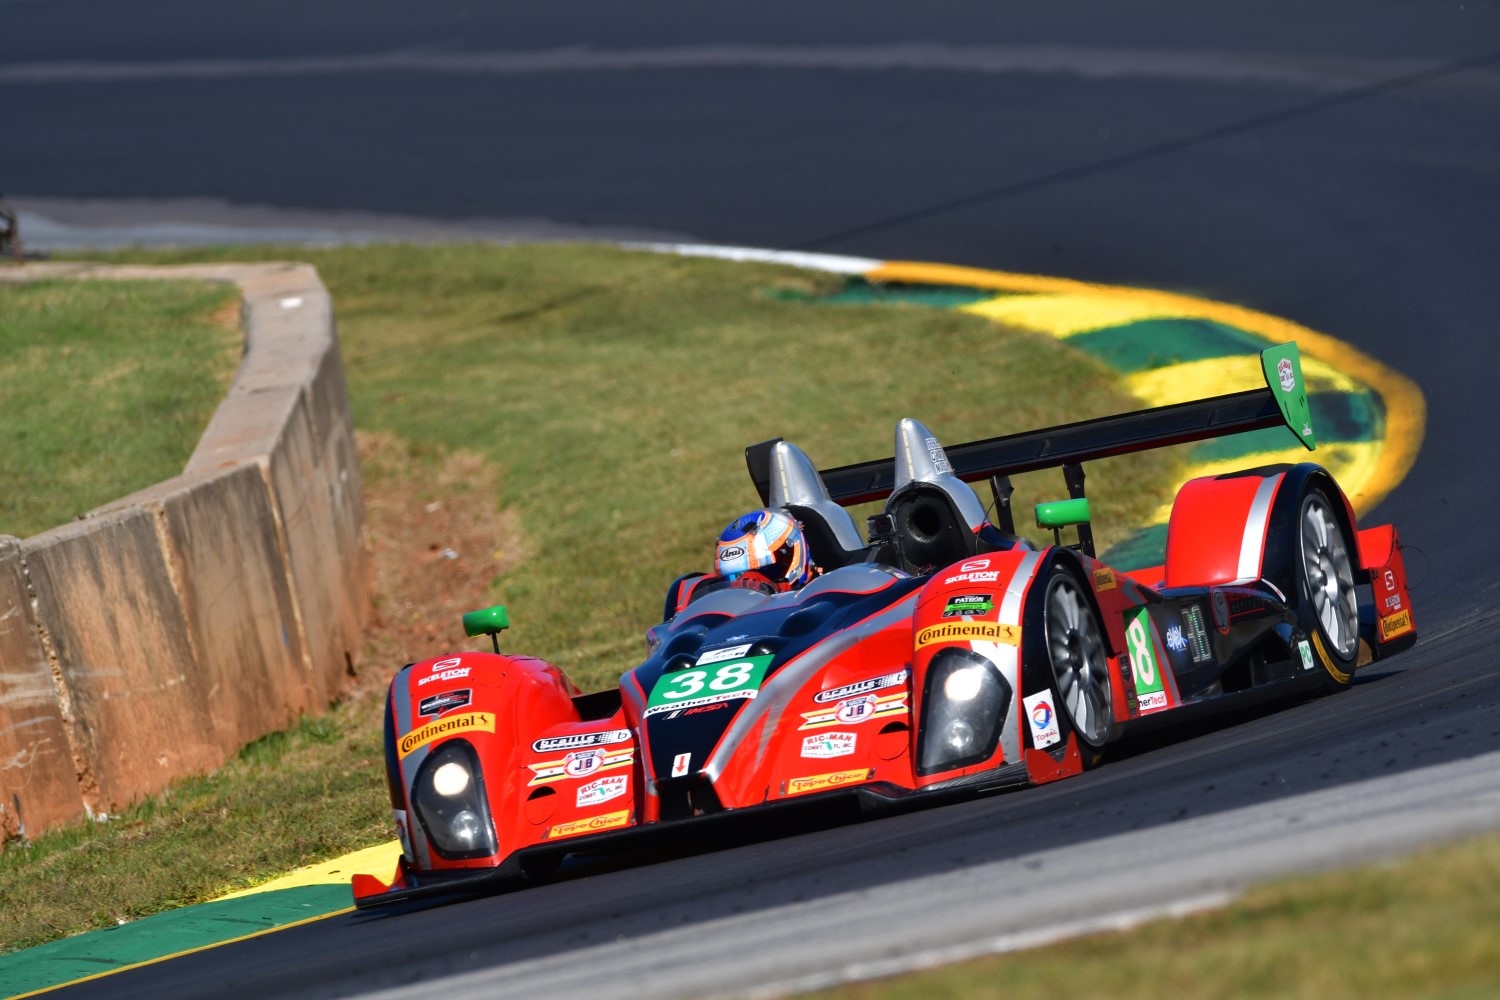 French at Petit LeMans